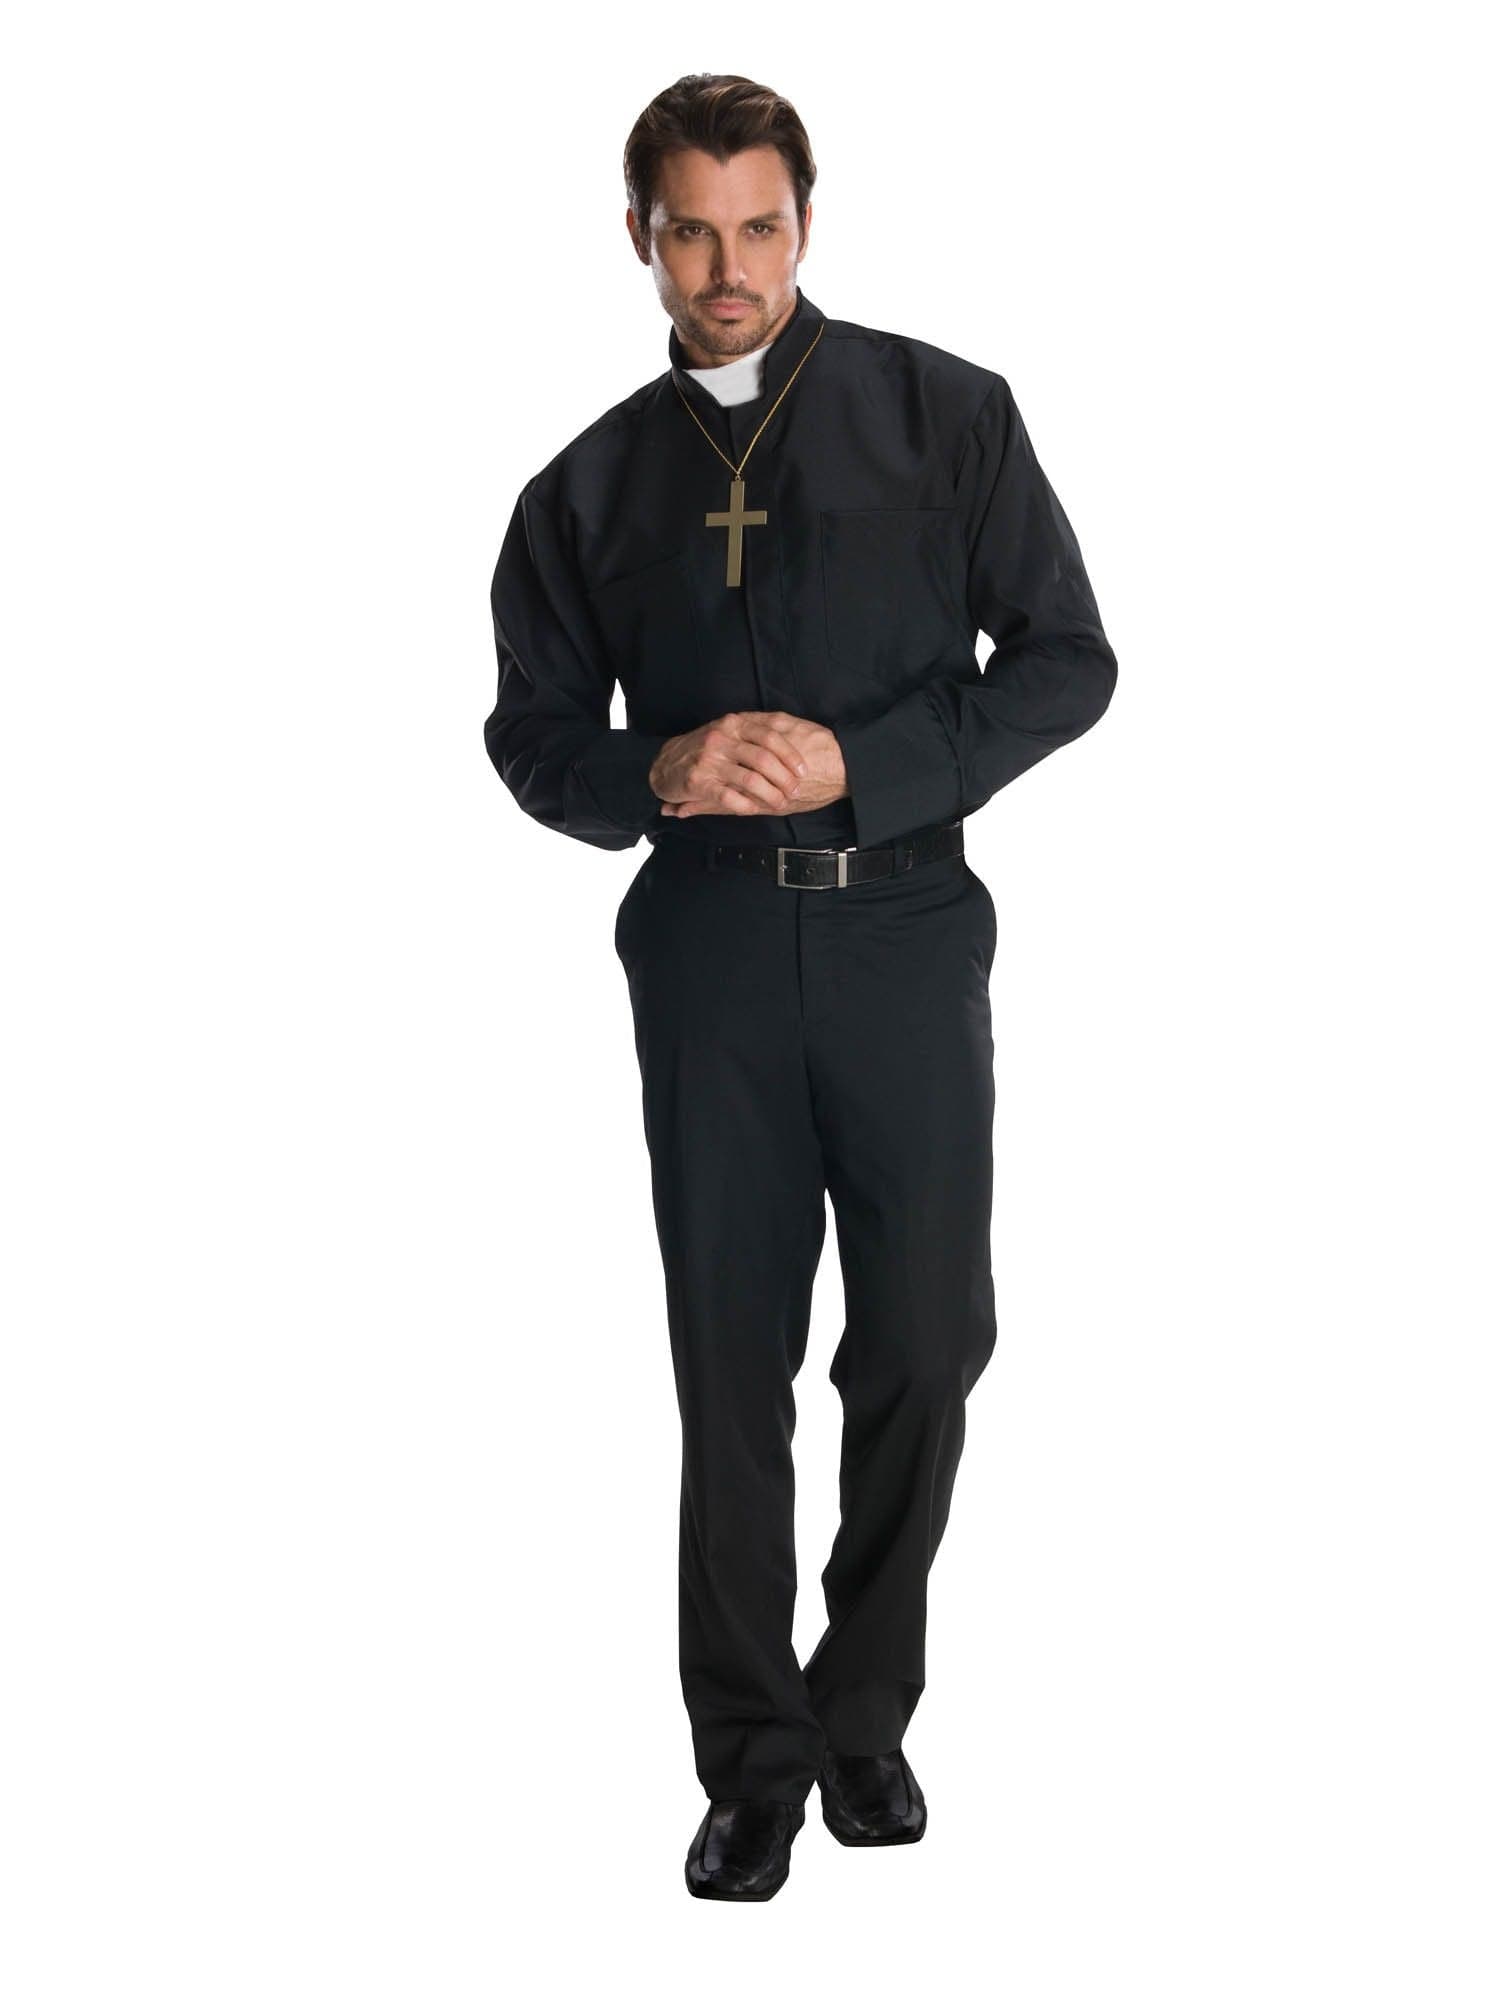 Adult Priest Shirt and Cross Necklace - costumes.com